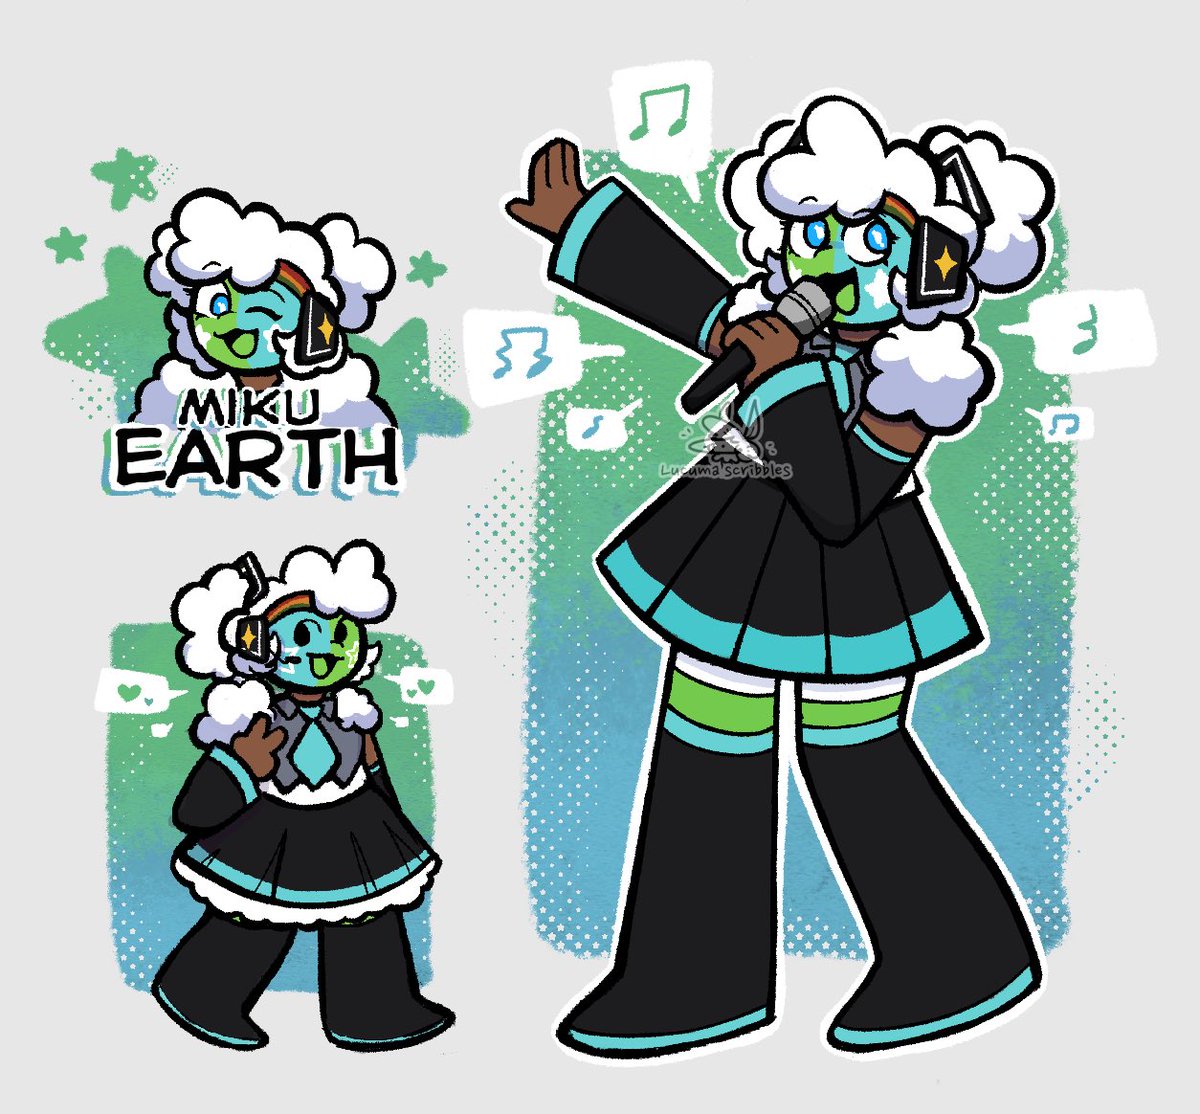 And now, it’s time for moment you’ve been waiting for!
Miku earth! 🎶
#lunarandearthshow #tsamsearth #earthfnaf #laes